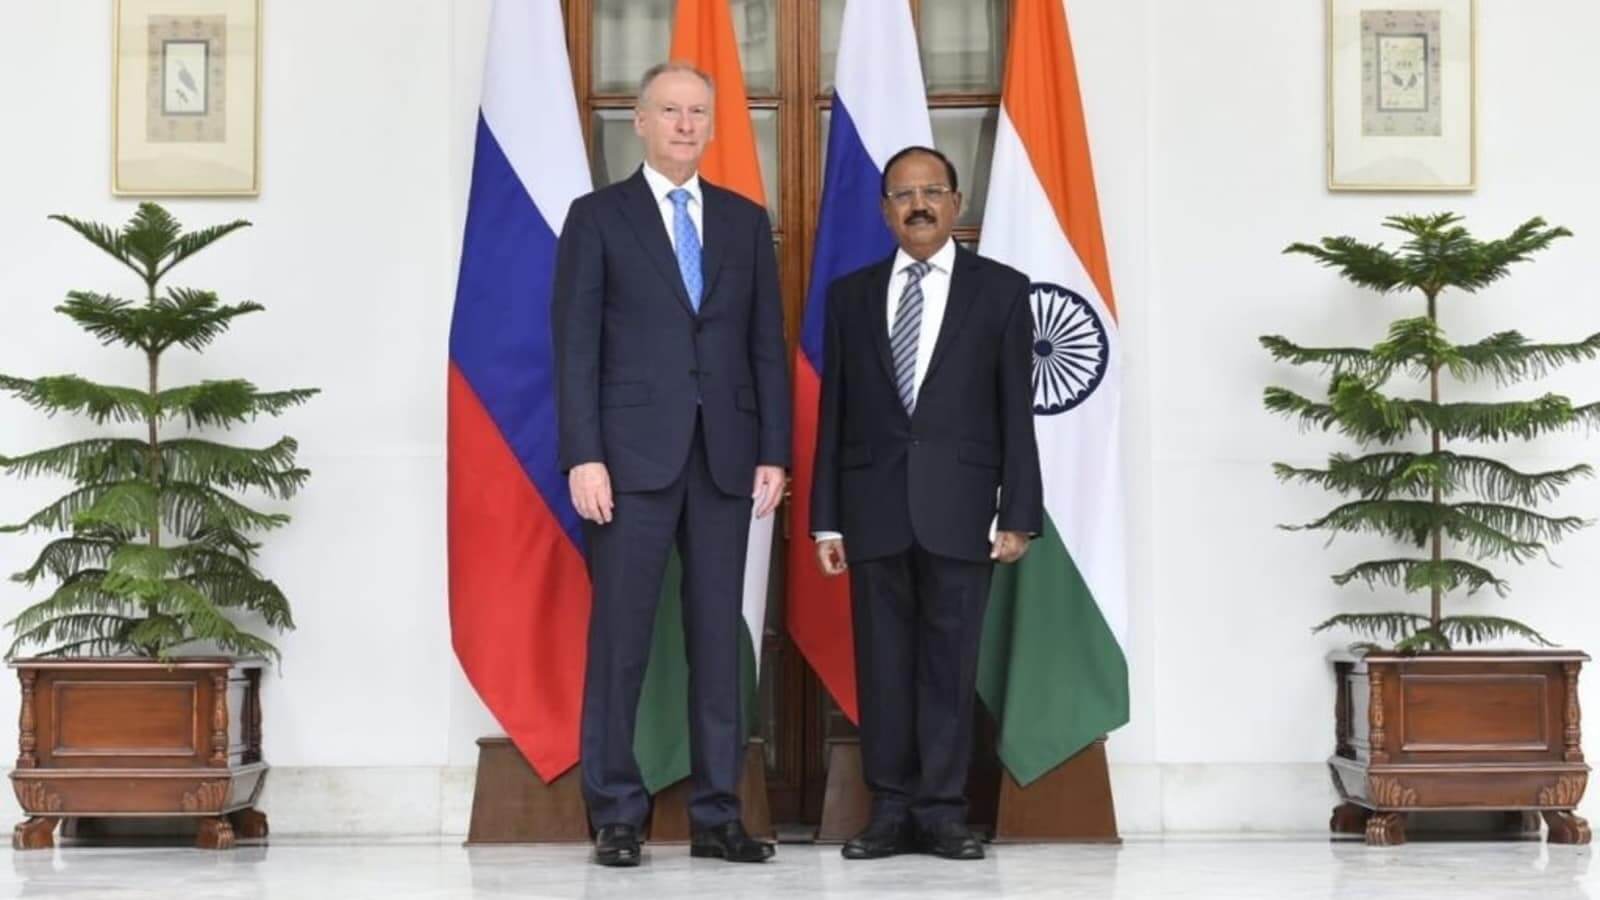 Ukraine Says India’s Russian Oil Purchases Stained With “Blood” as Doval Visits Russia